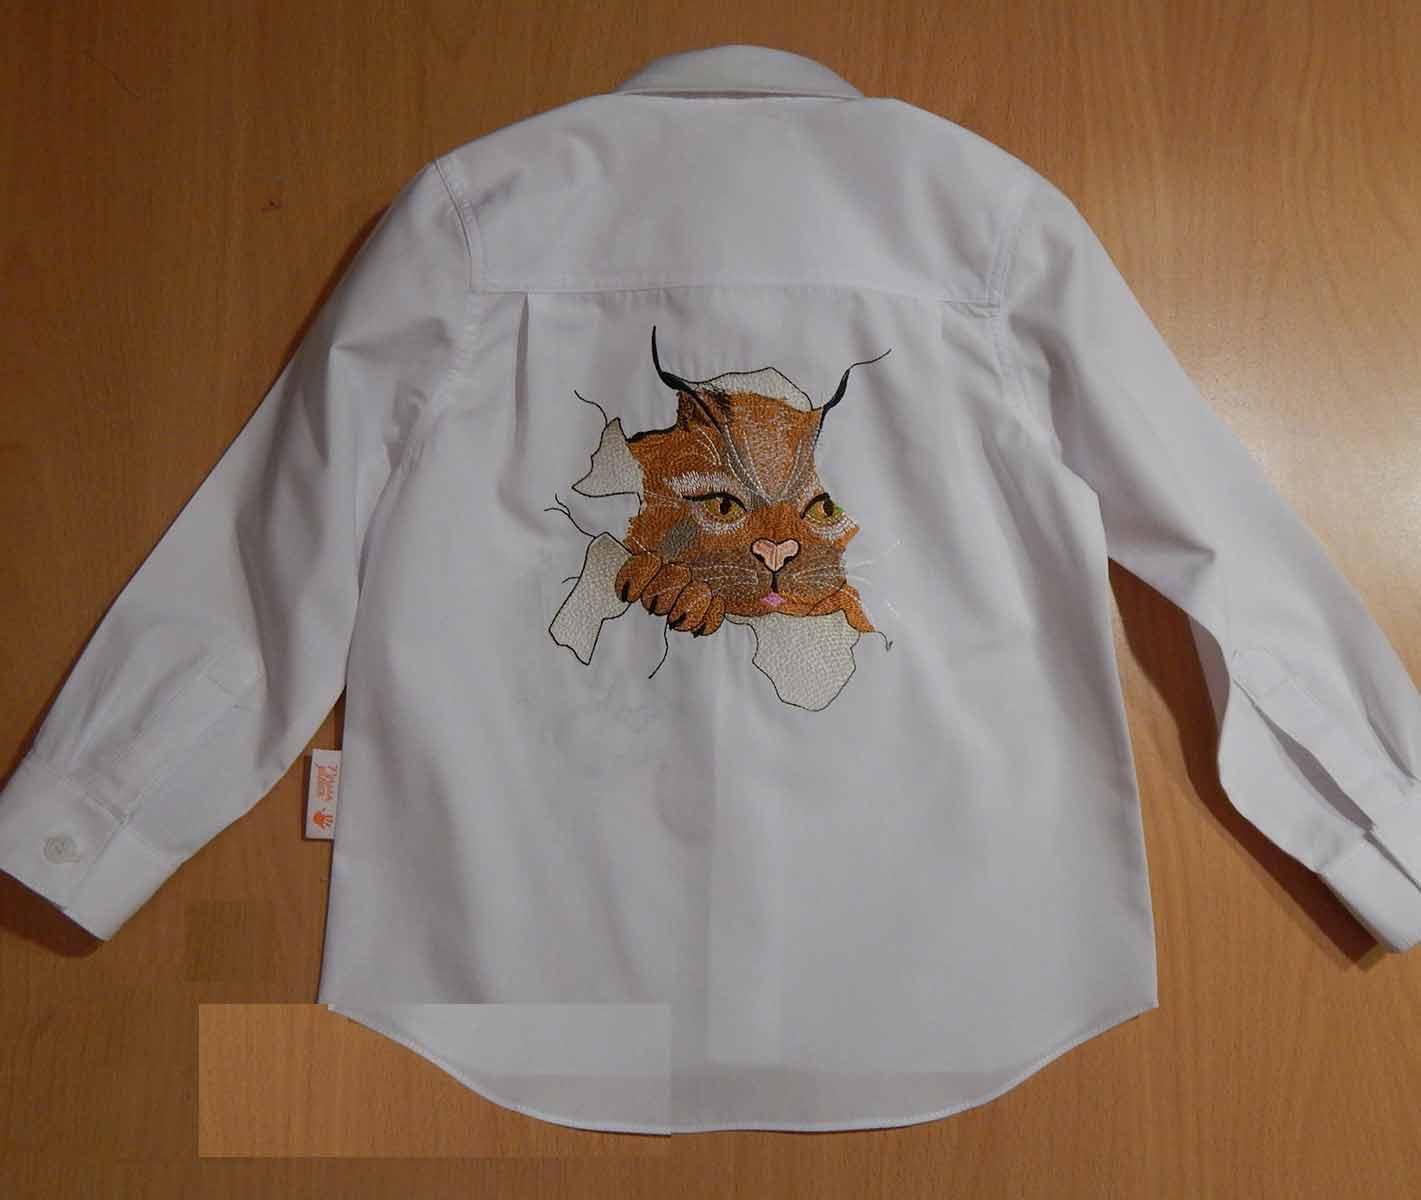 Shirt with Angry Cat free embroidery design